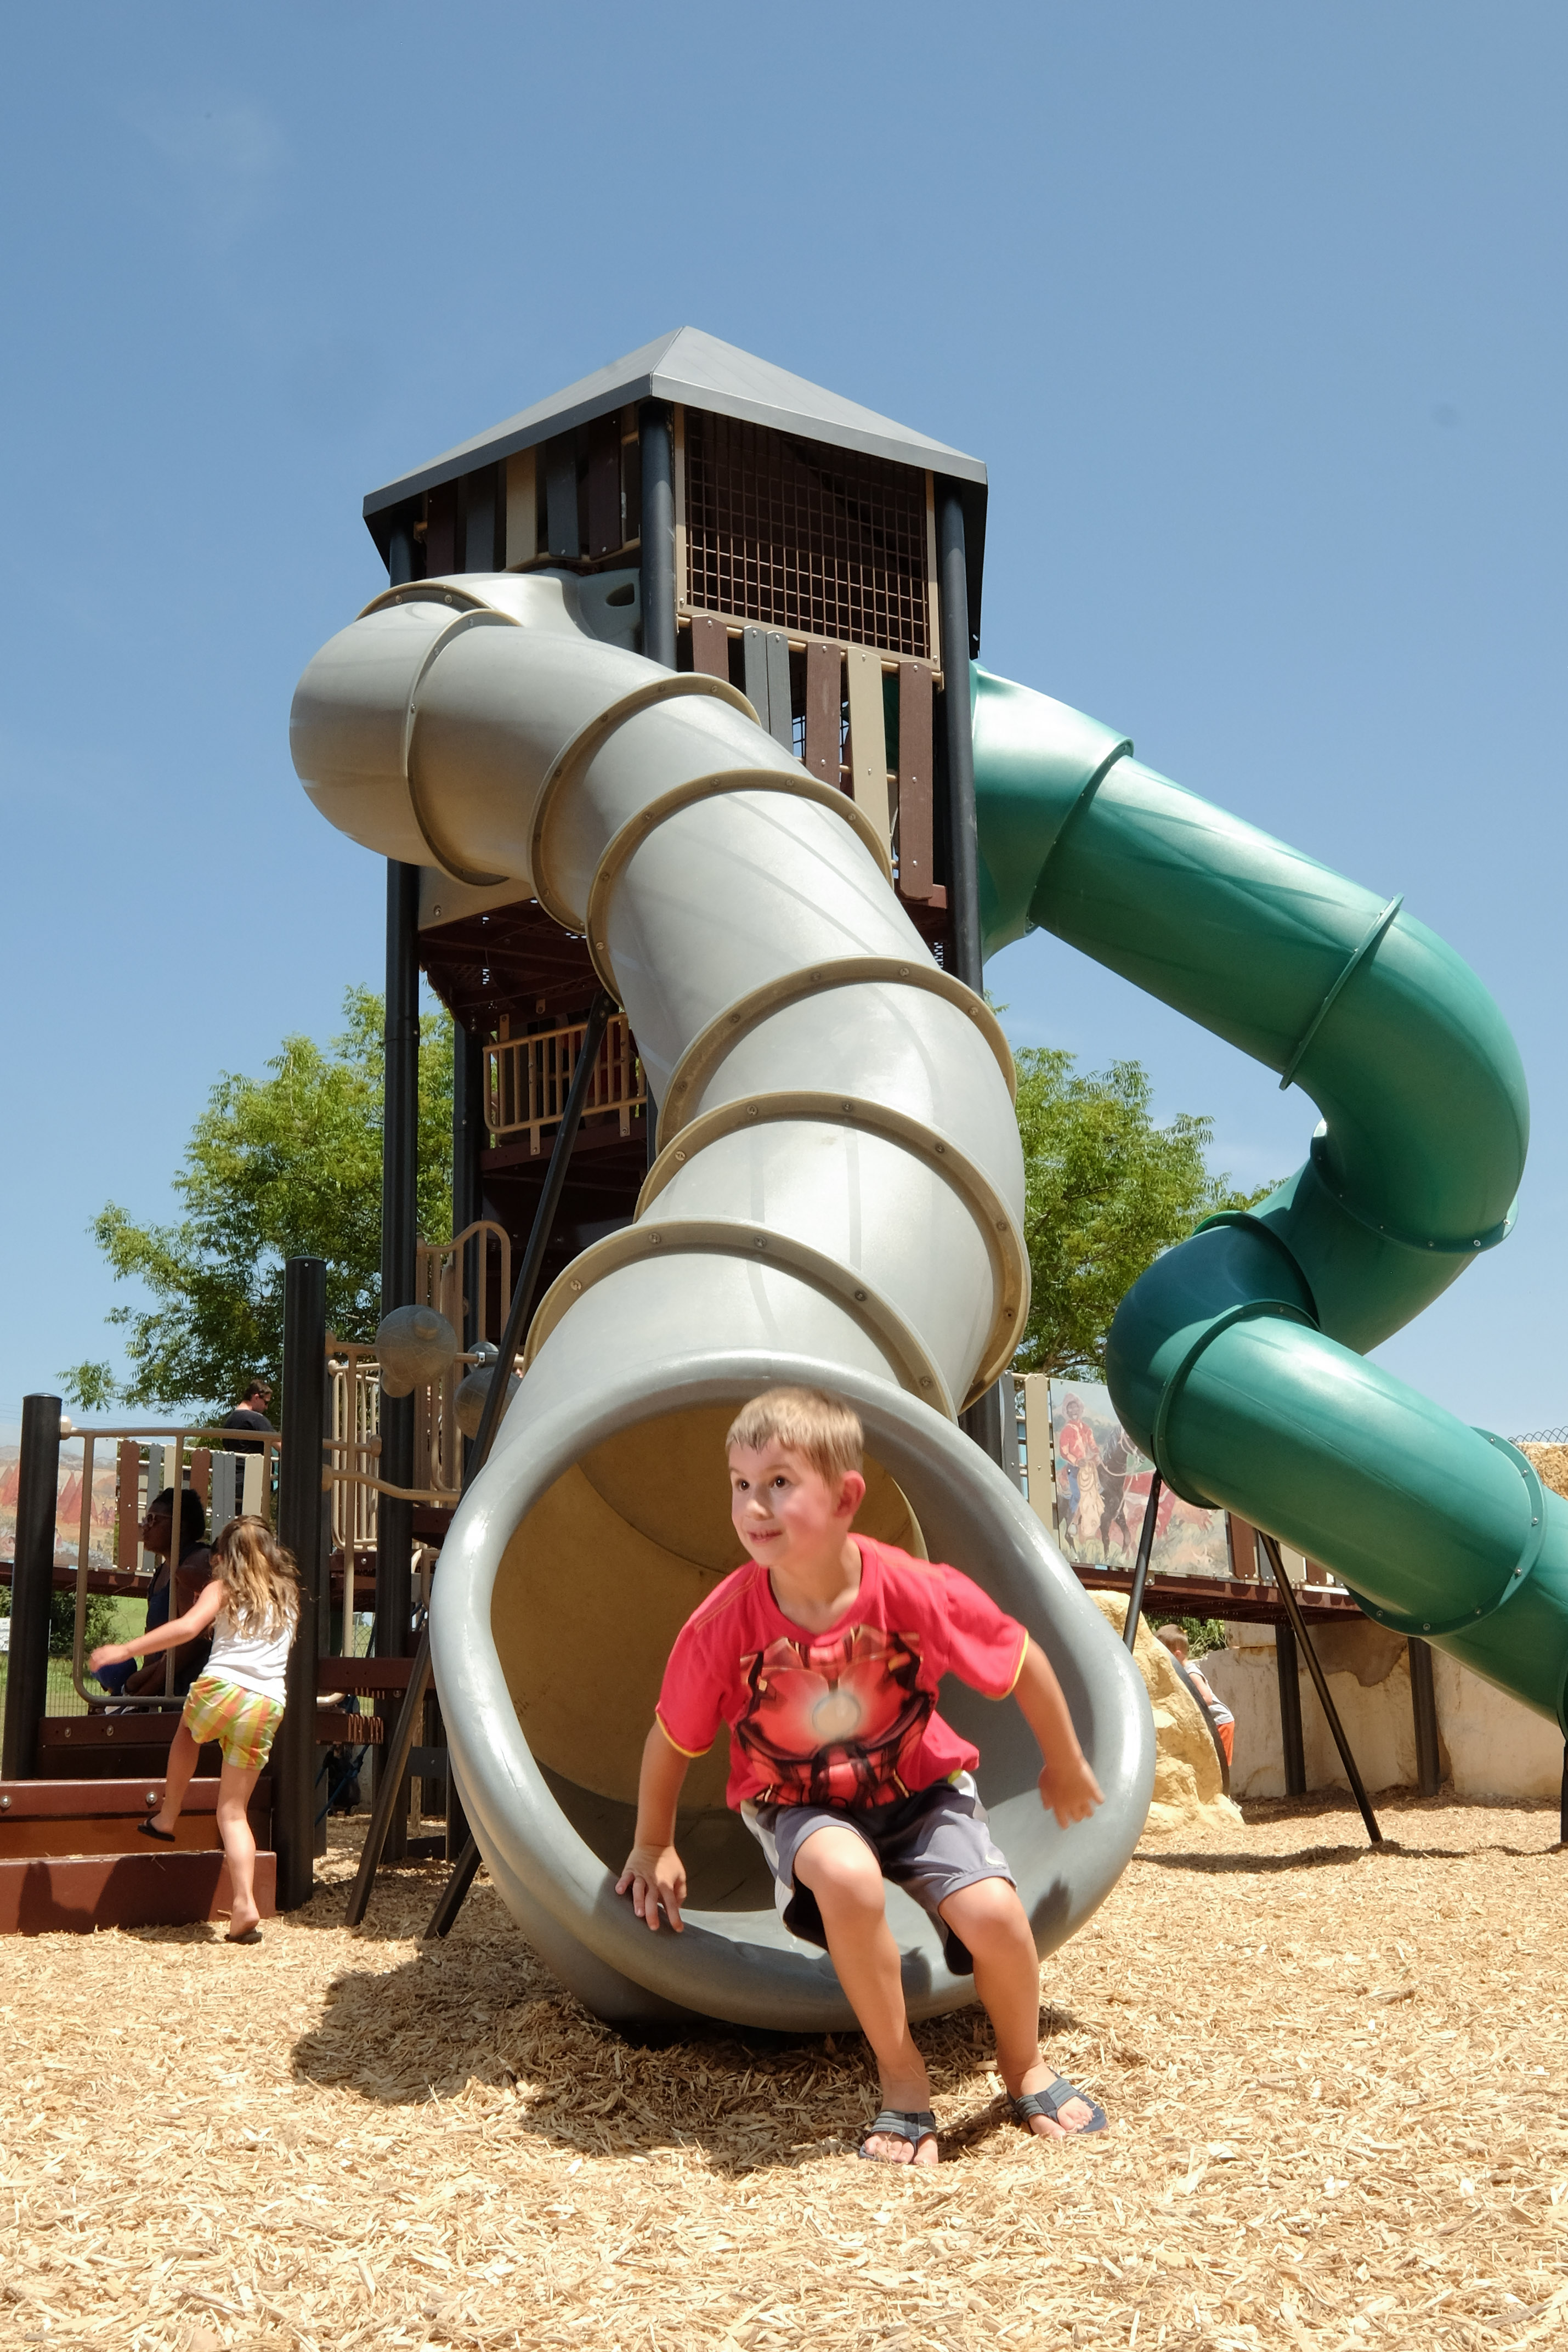 At the center of the playground is a massive tower with tube slides!